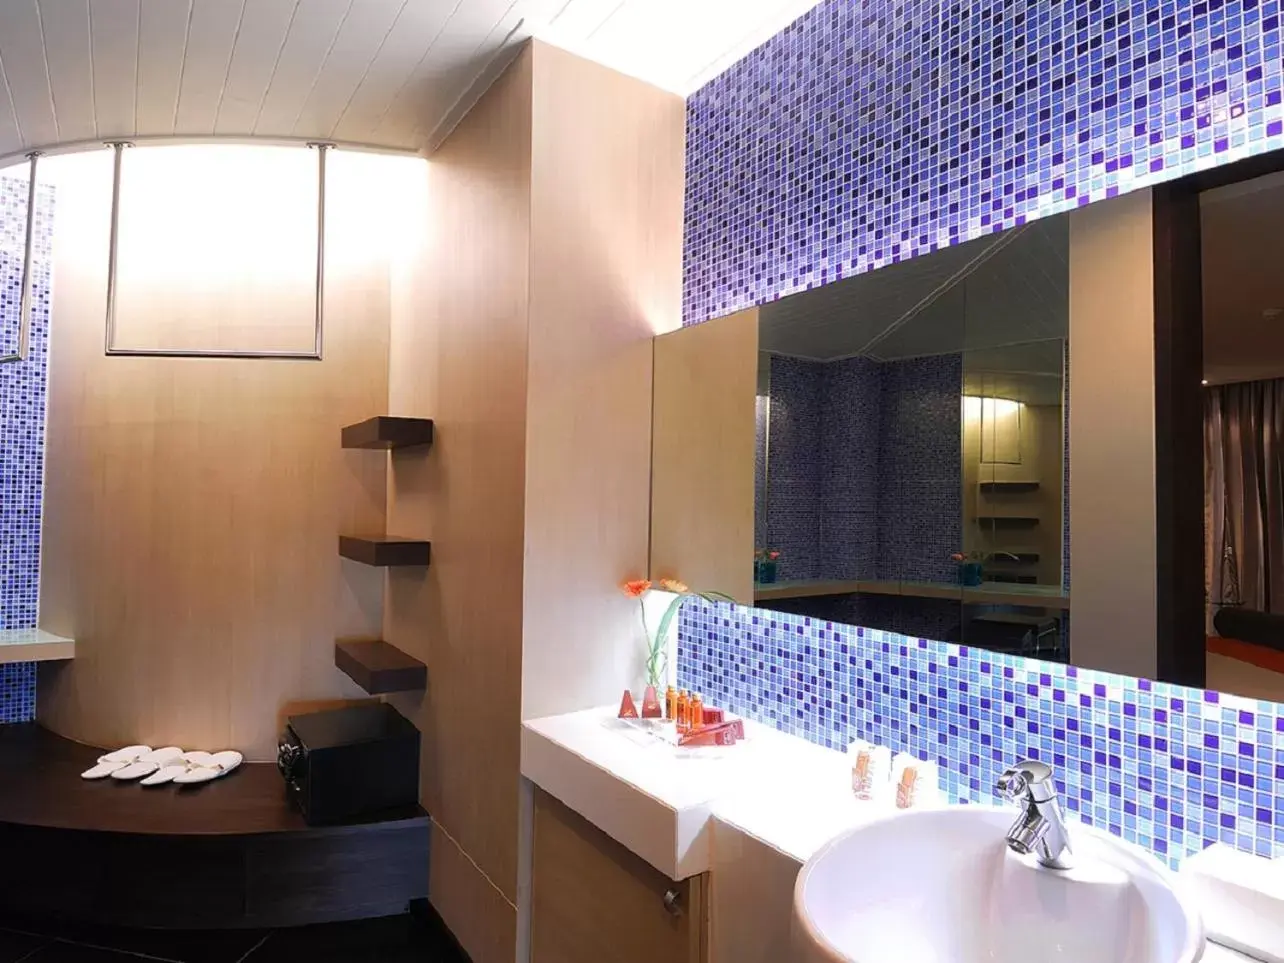 Area and facilities, Bathroom in The Zign Hotel